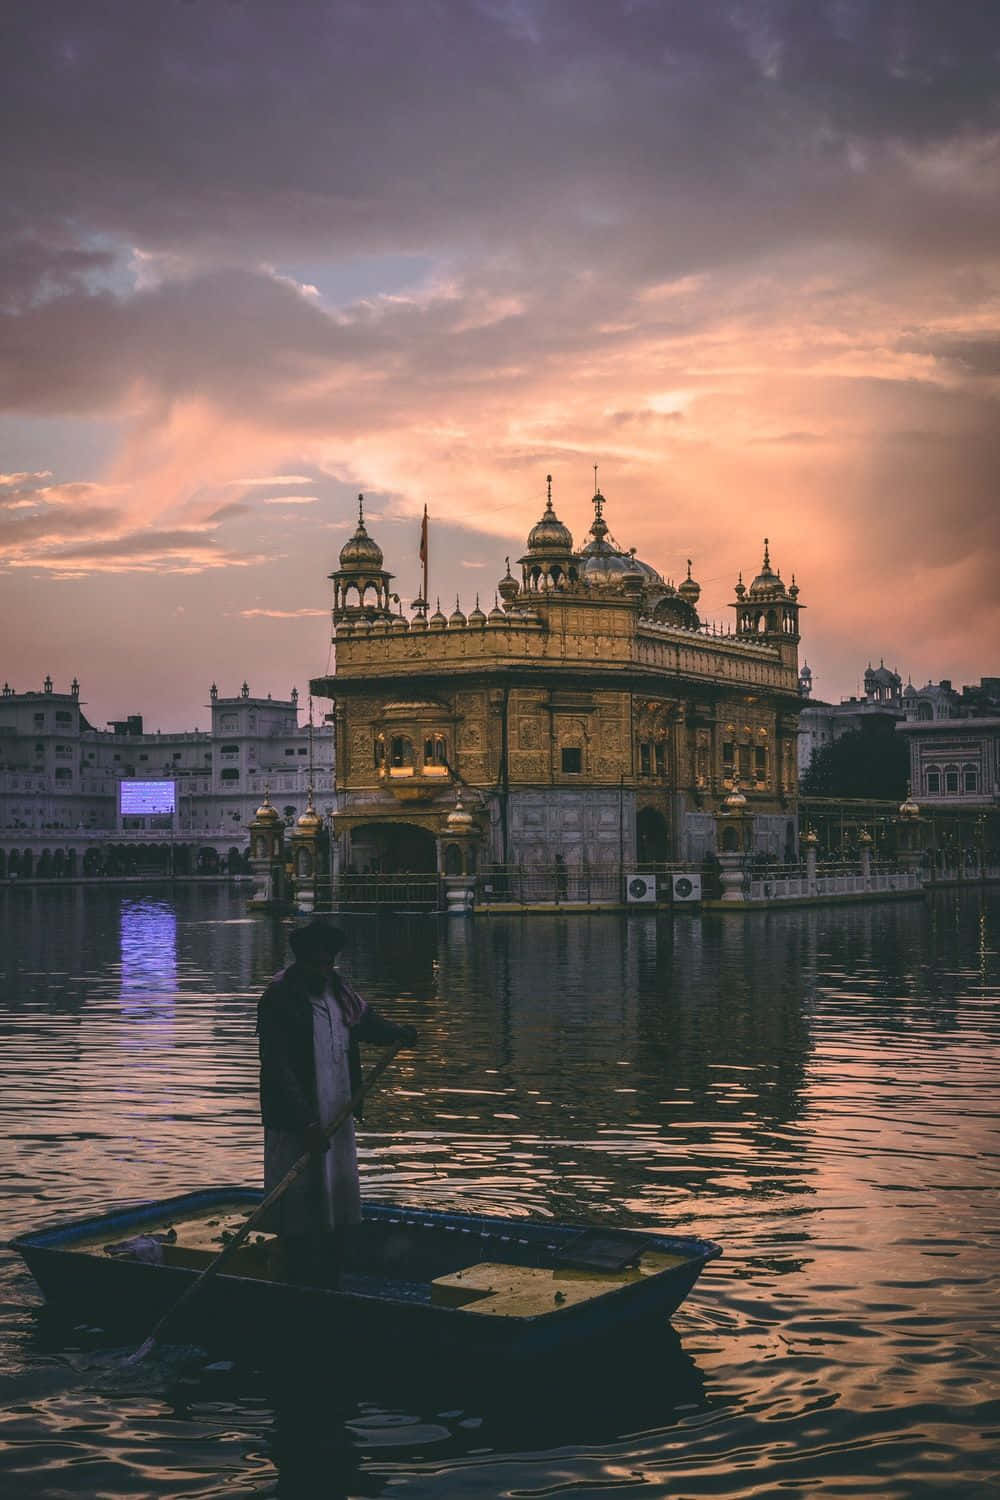 Majestic Golden Temple amid serene waters under a tranquil sky